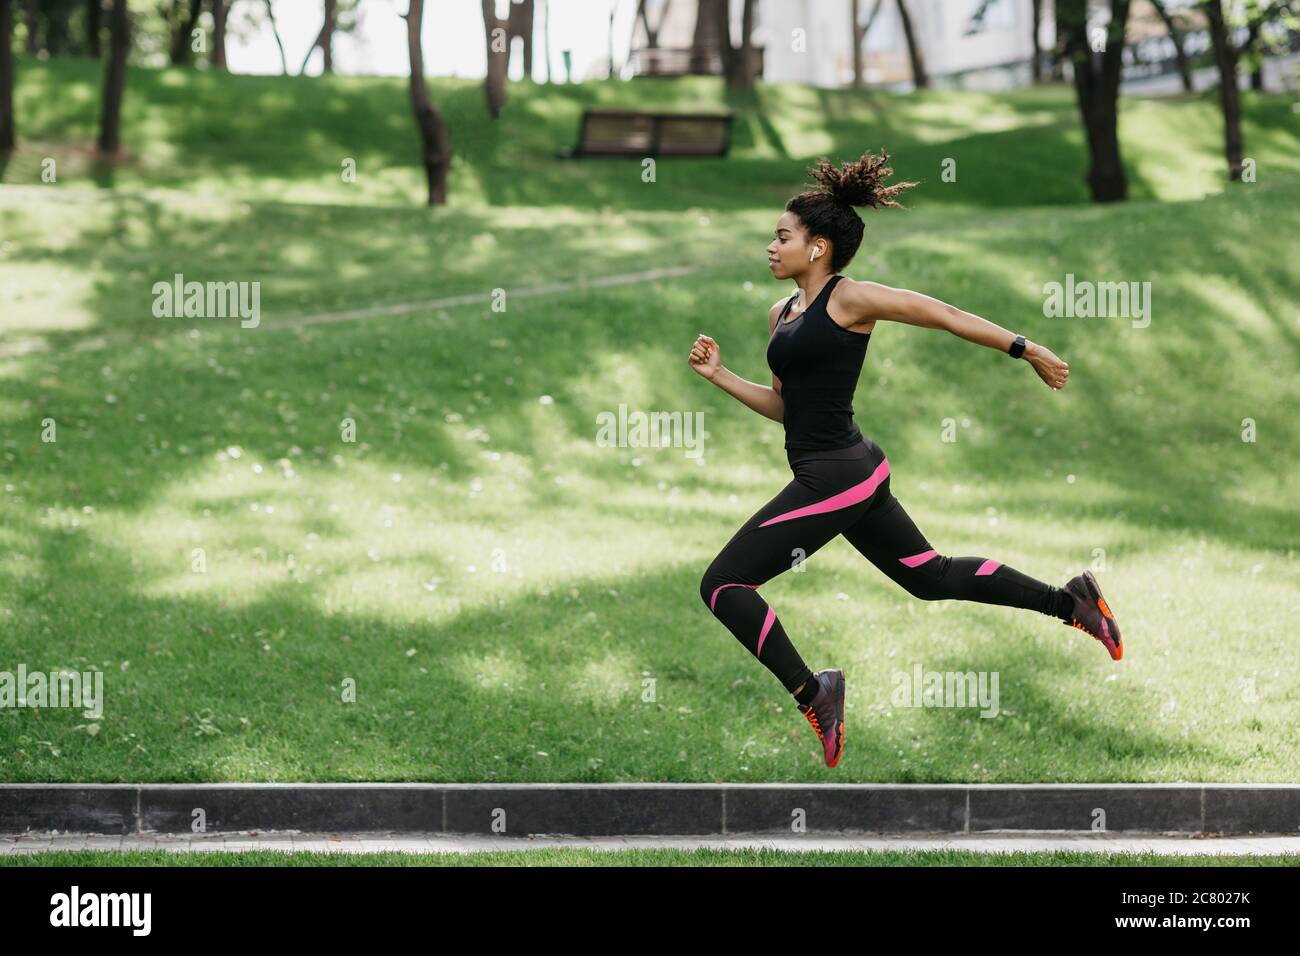 Jump and running outdoors at nature. Girl in sport uniform froze in air Stock Photo